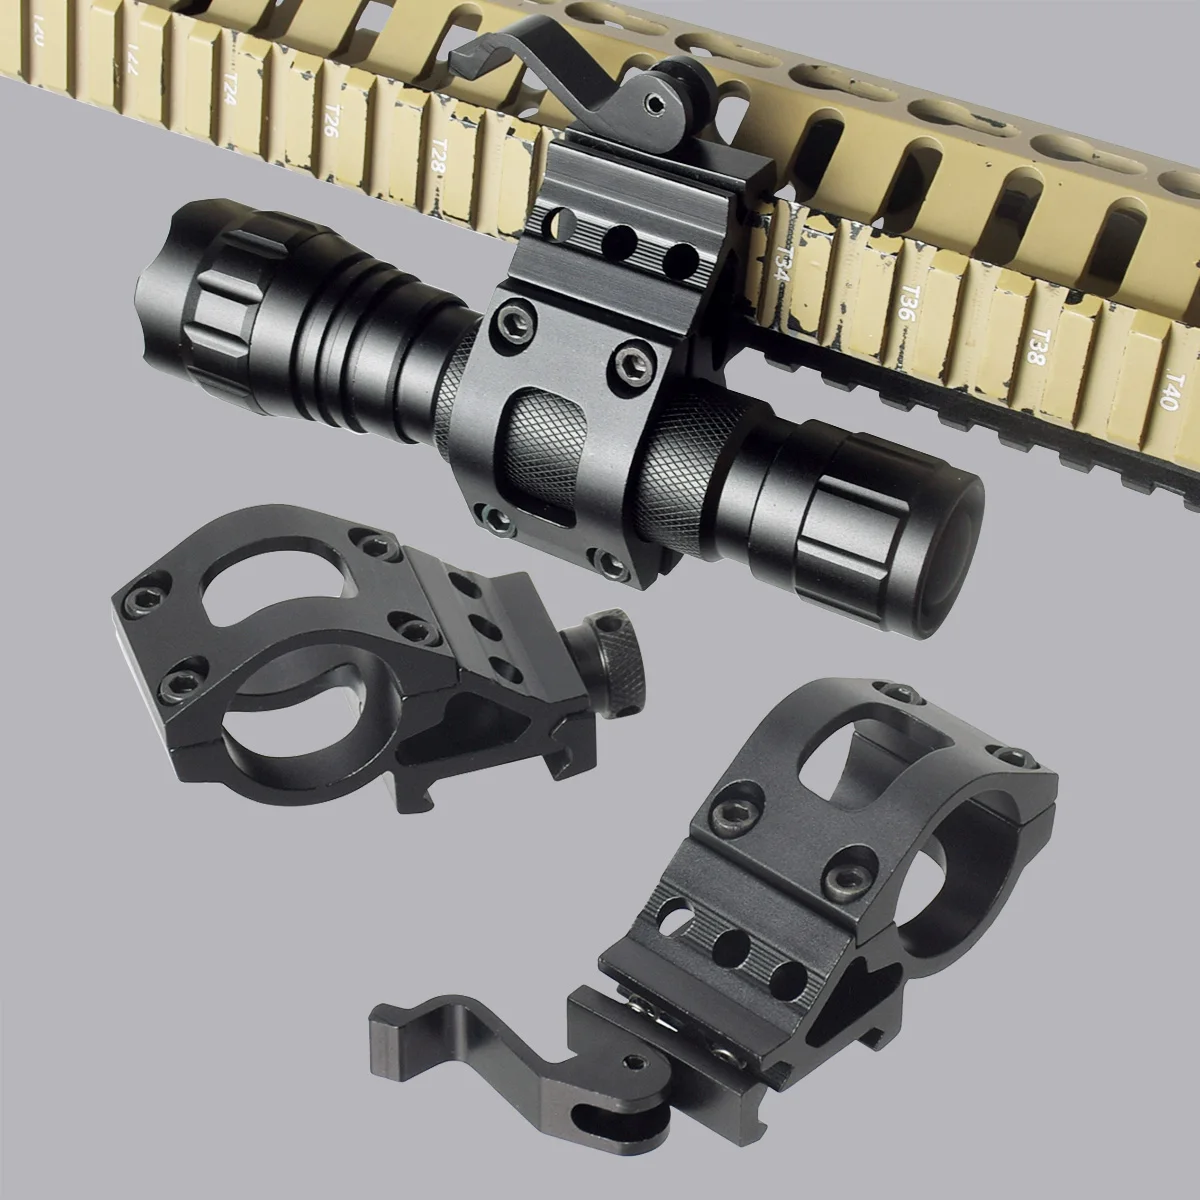 

Tactical 25.4mm Quick Release Offset Flashlight Scope Mount 20mm Picatinny Rail 45 Degree Sight Mount Hunting Accessories